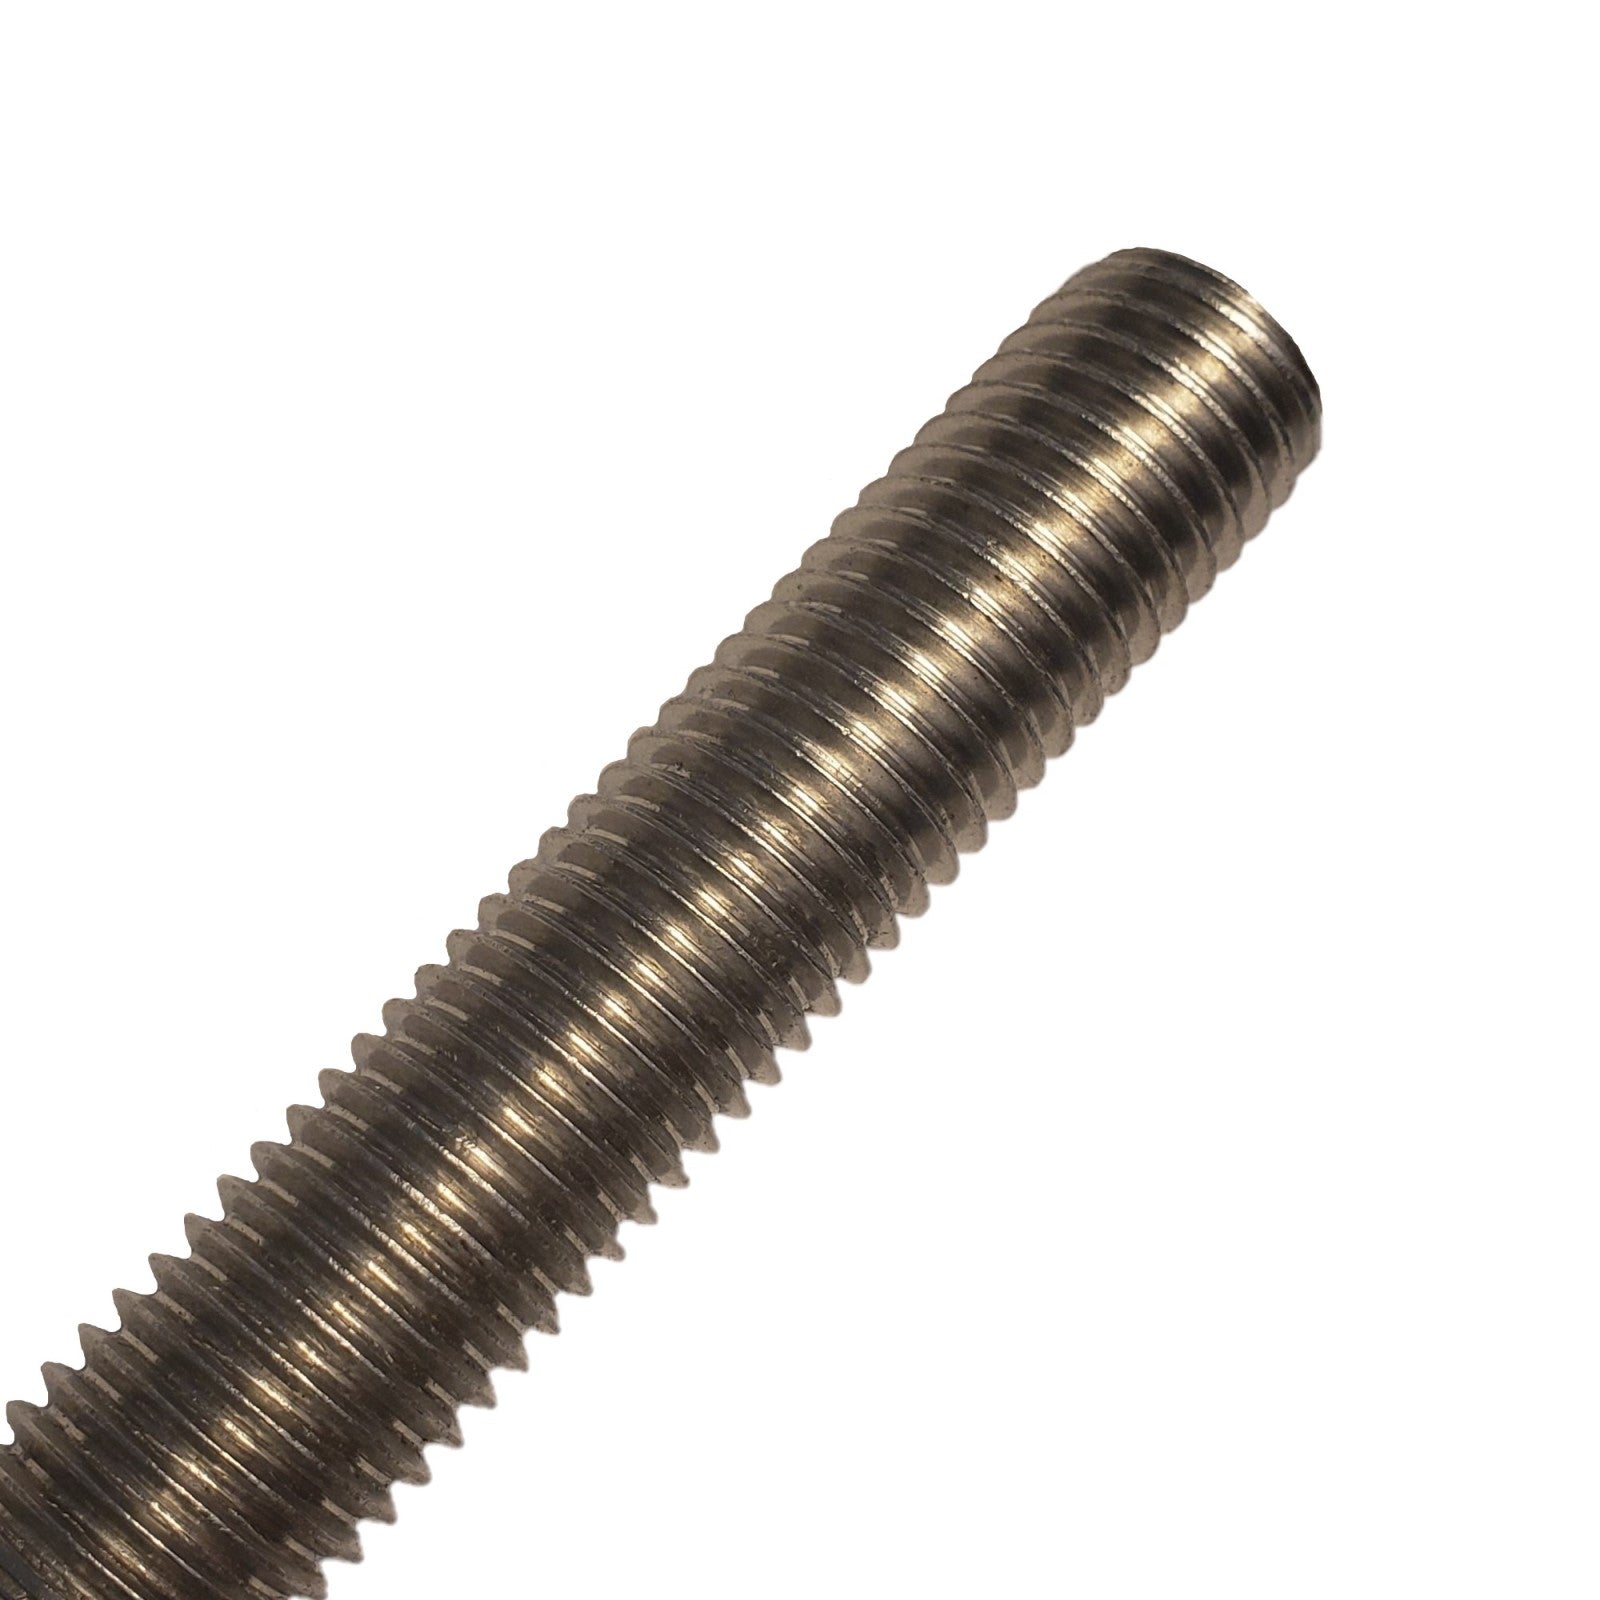 12 inch13 x 24 inch 316 Stainless Steel Threaded Rod